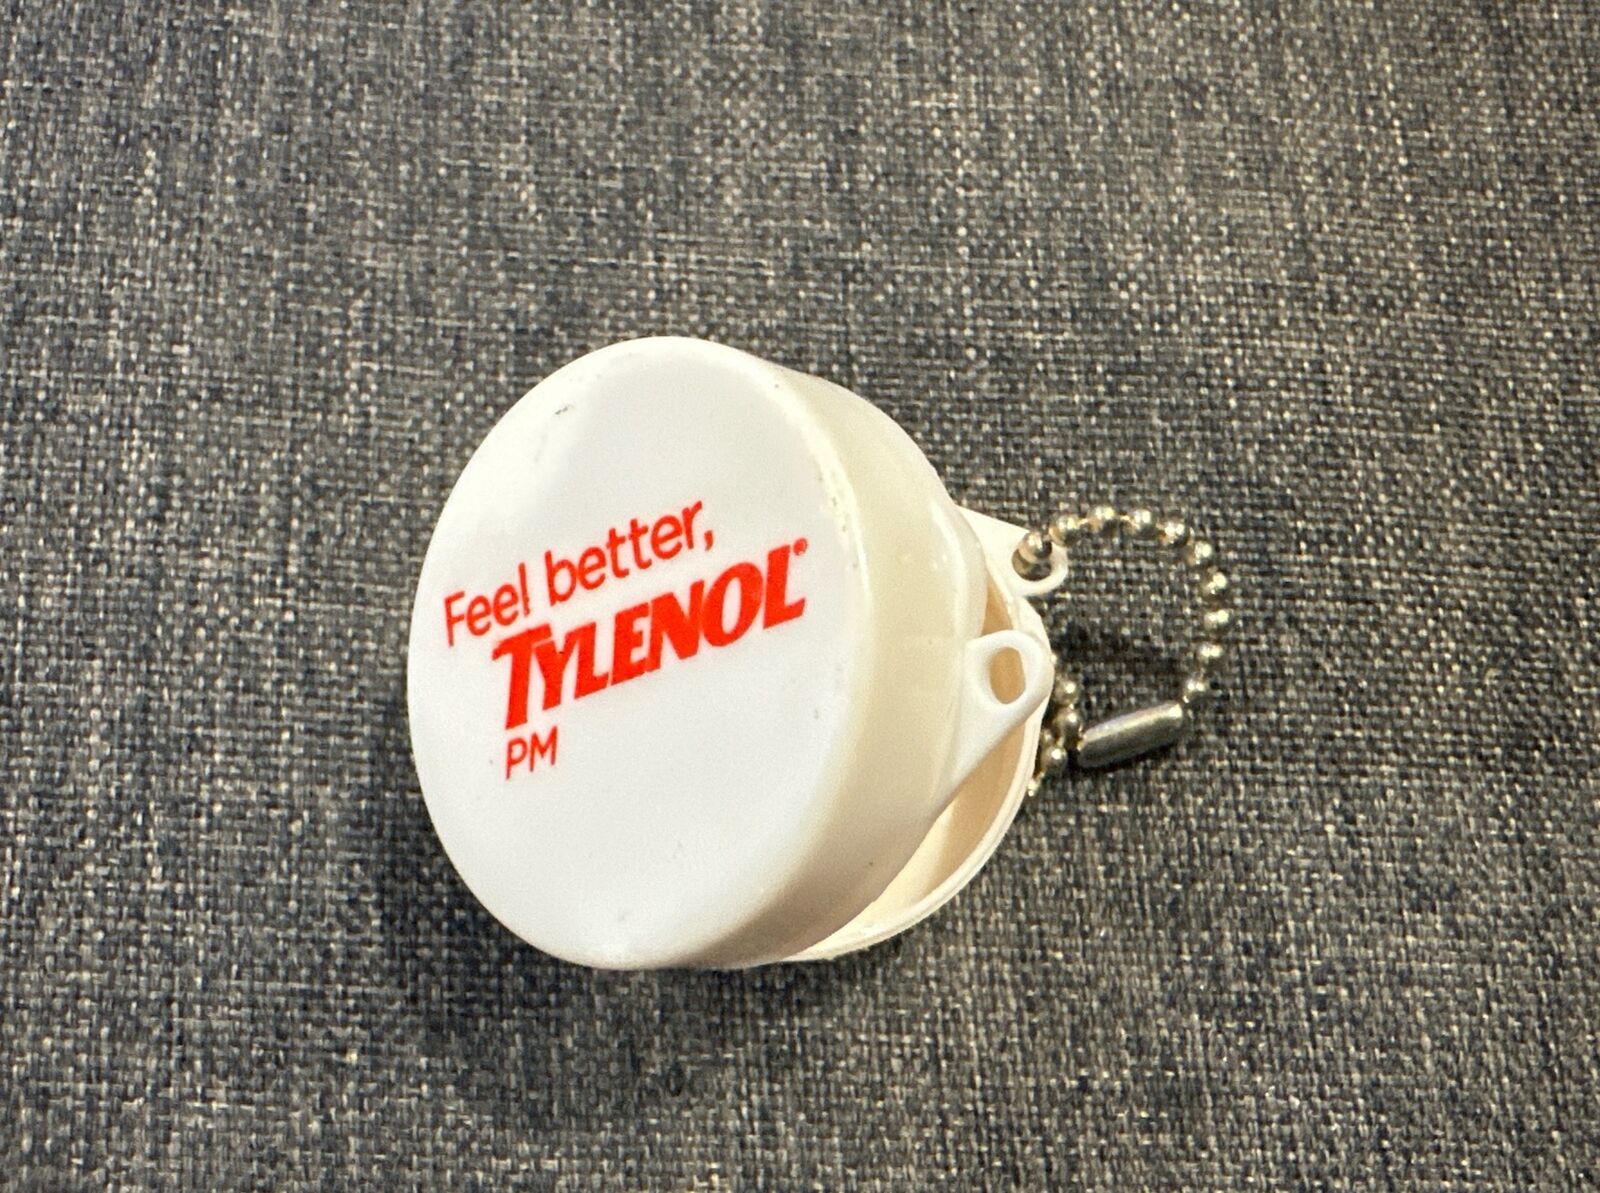 Tylenol PM Holder Case With Keychain White With Red Letters “Feel Better”